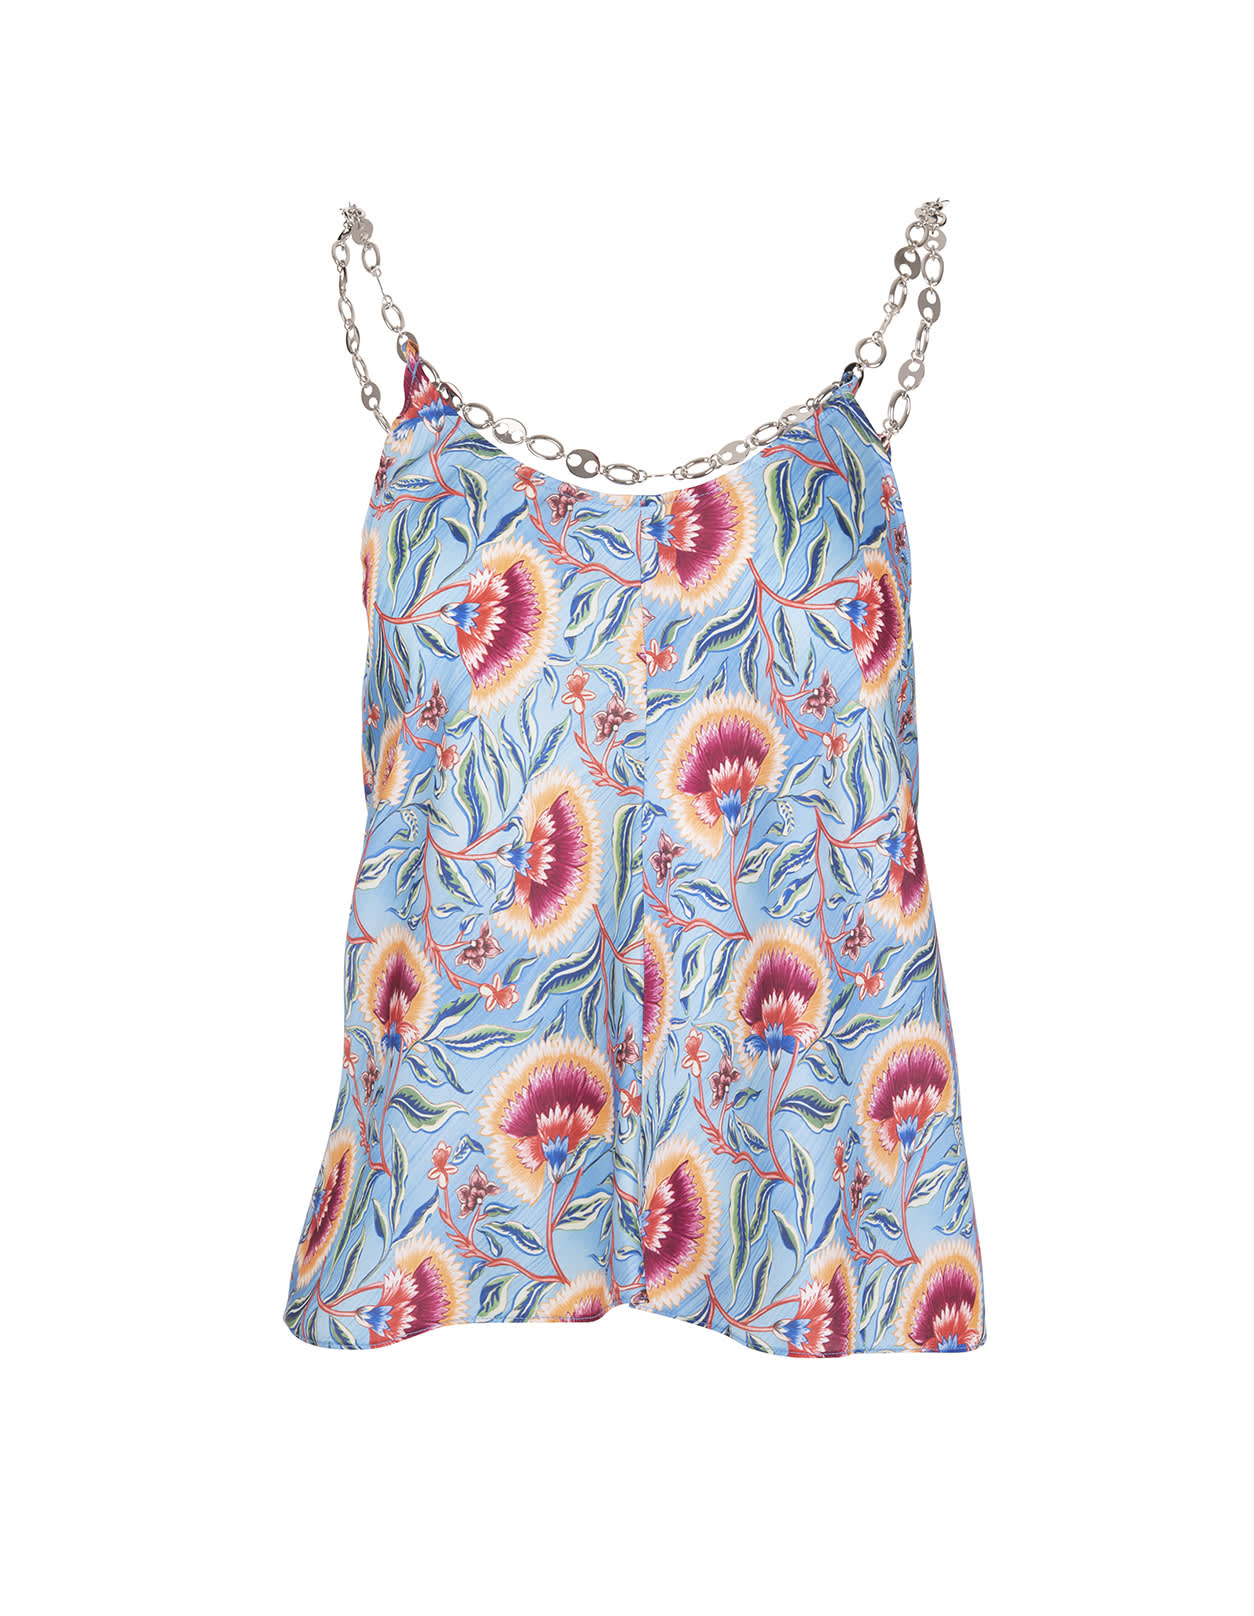 PACO RABANNE BLUE FLORAL TOP WITH JEWEL STRAPS